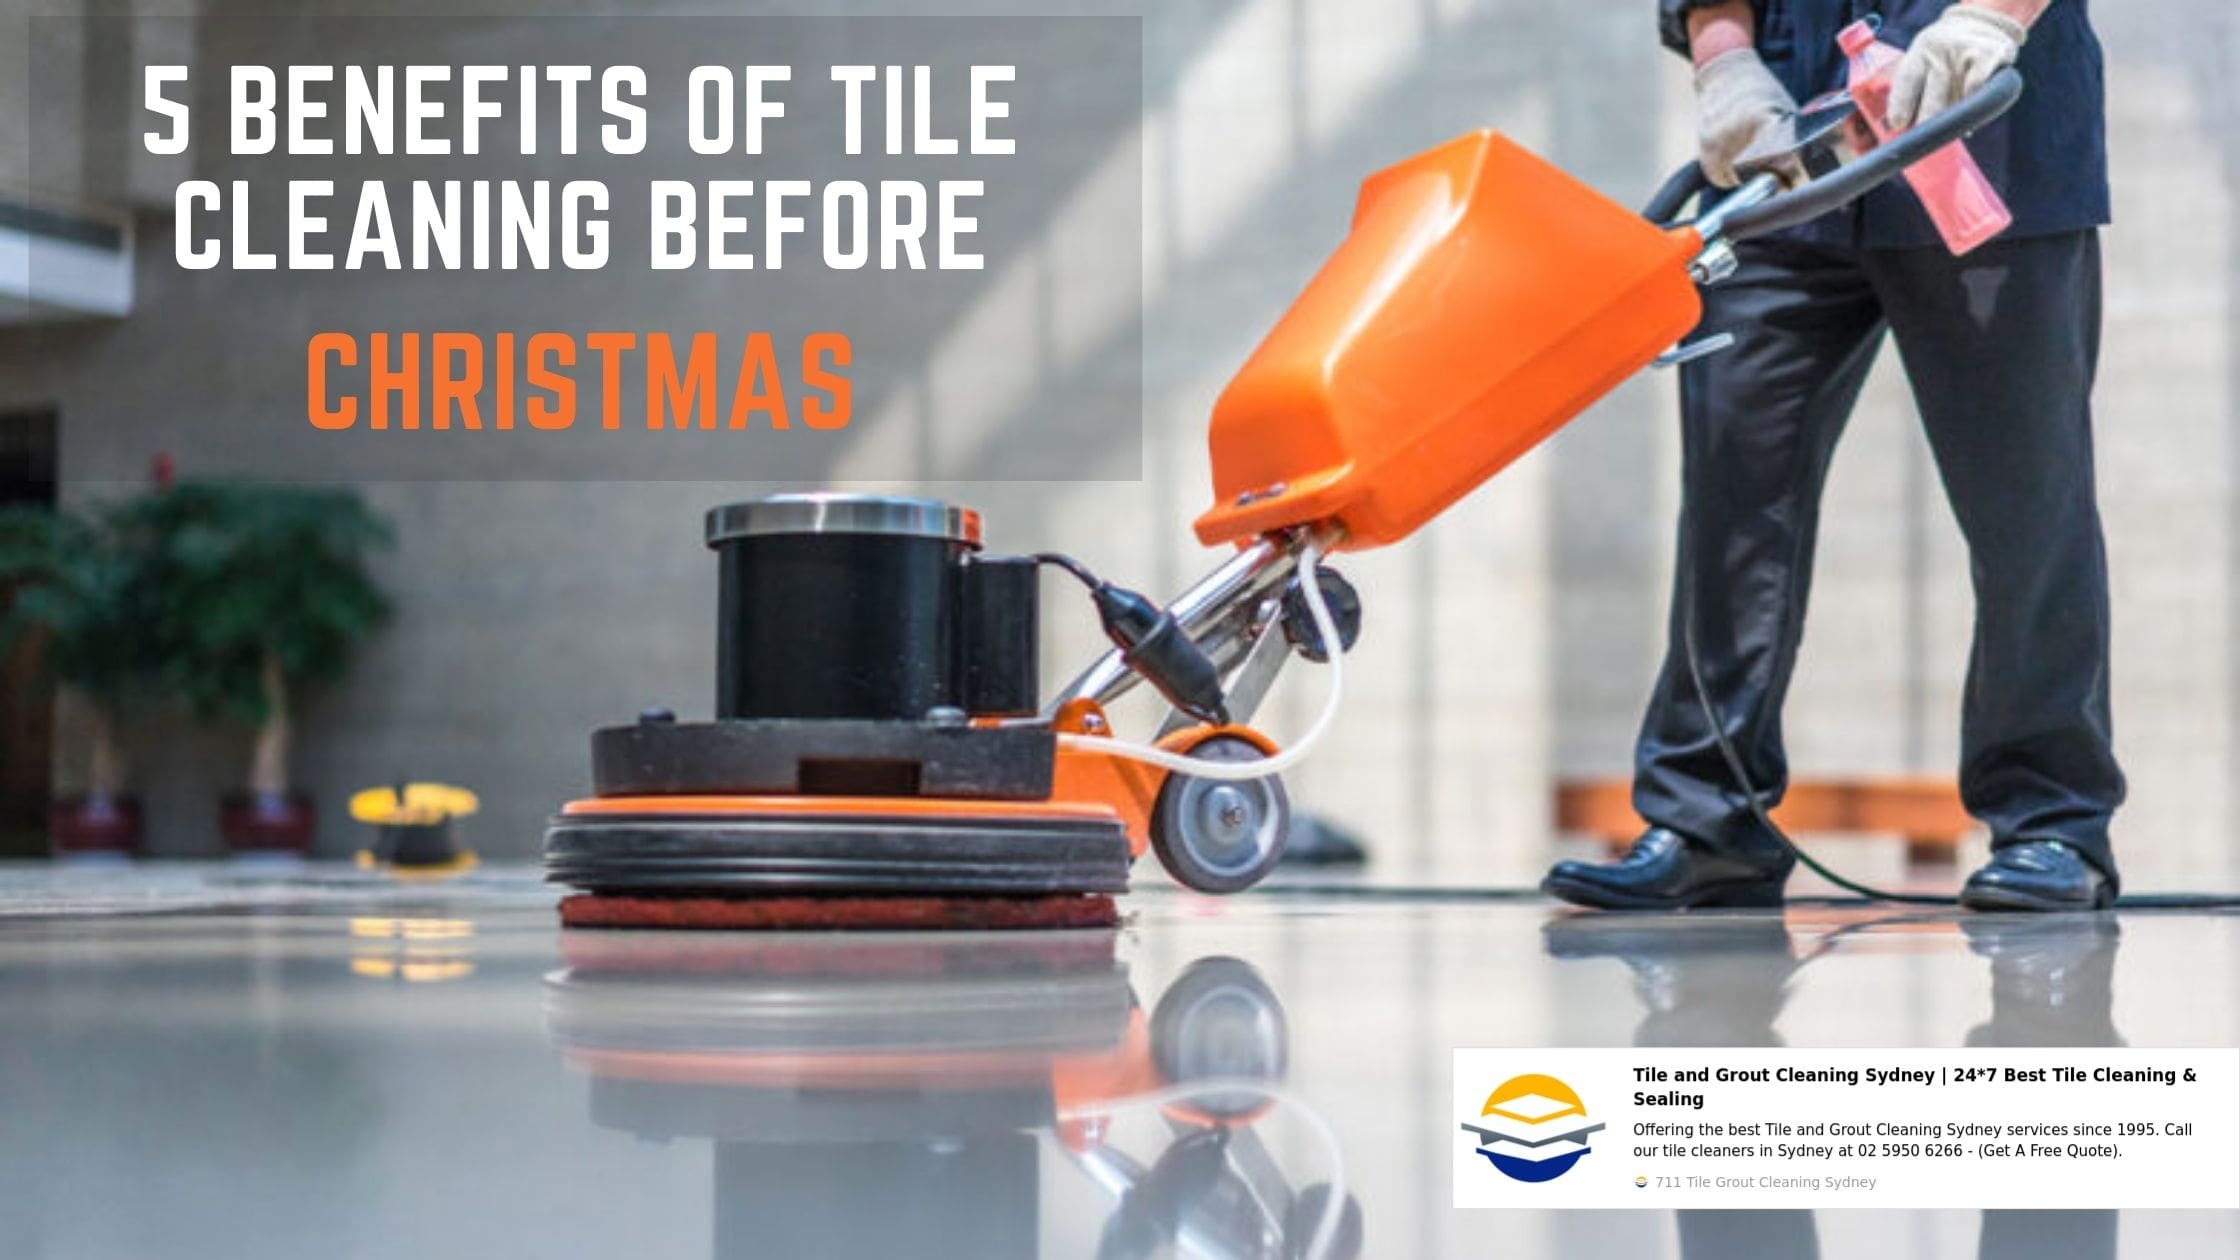 Benefits of a professional tile cleaning Before Christmas